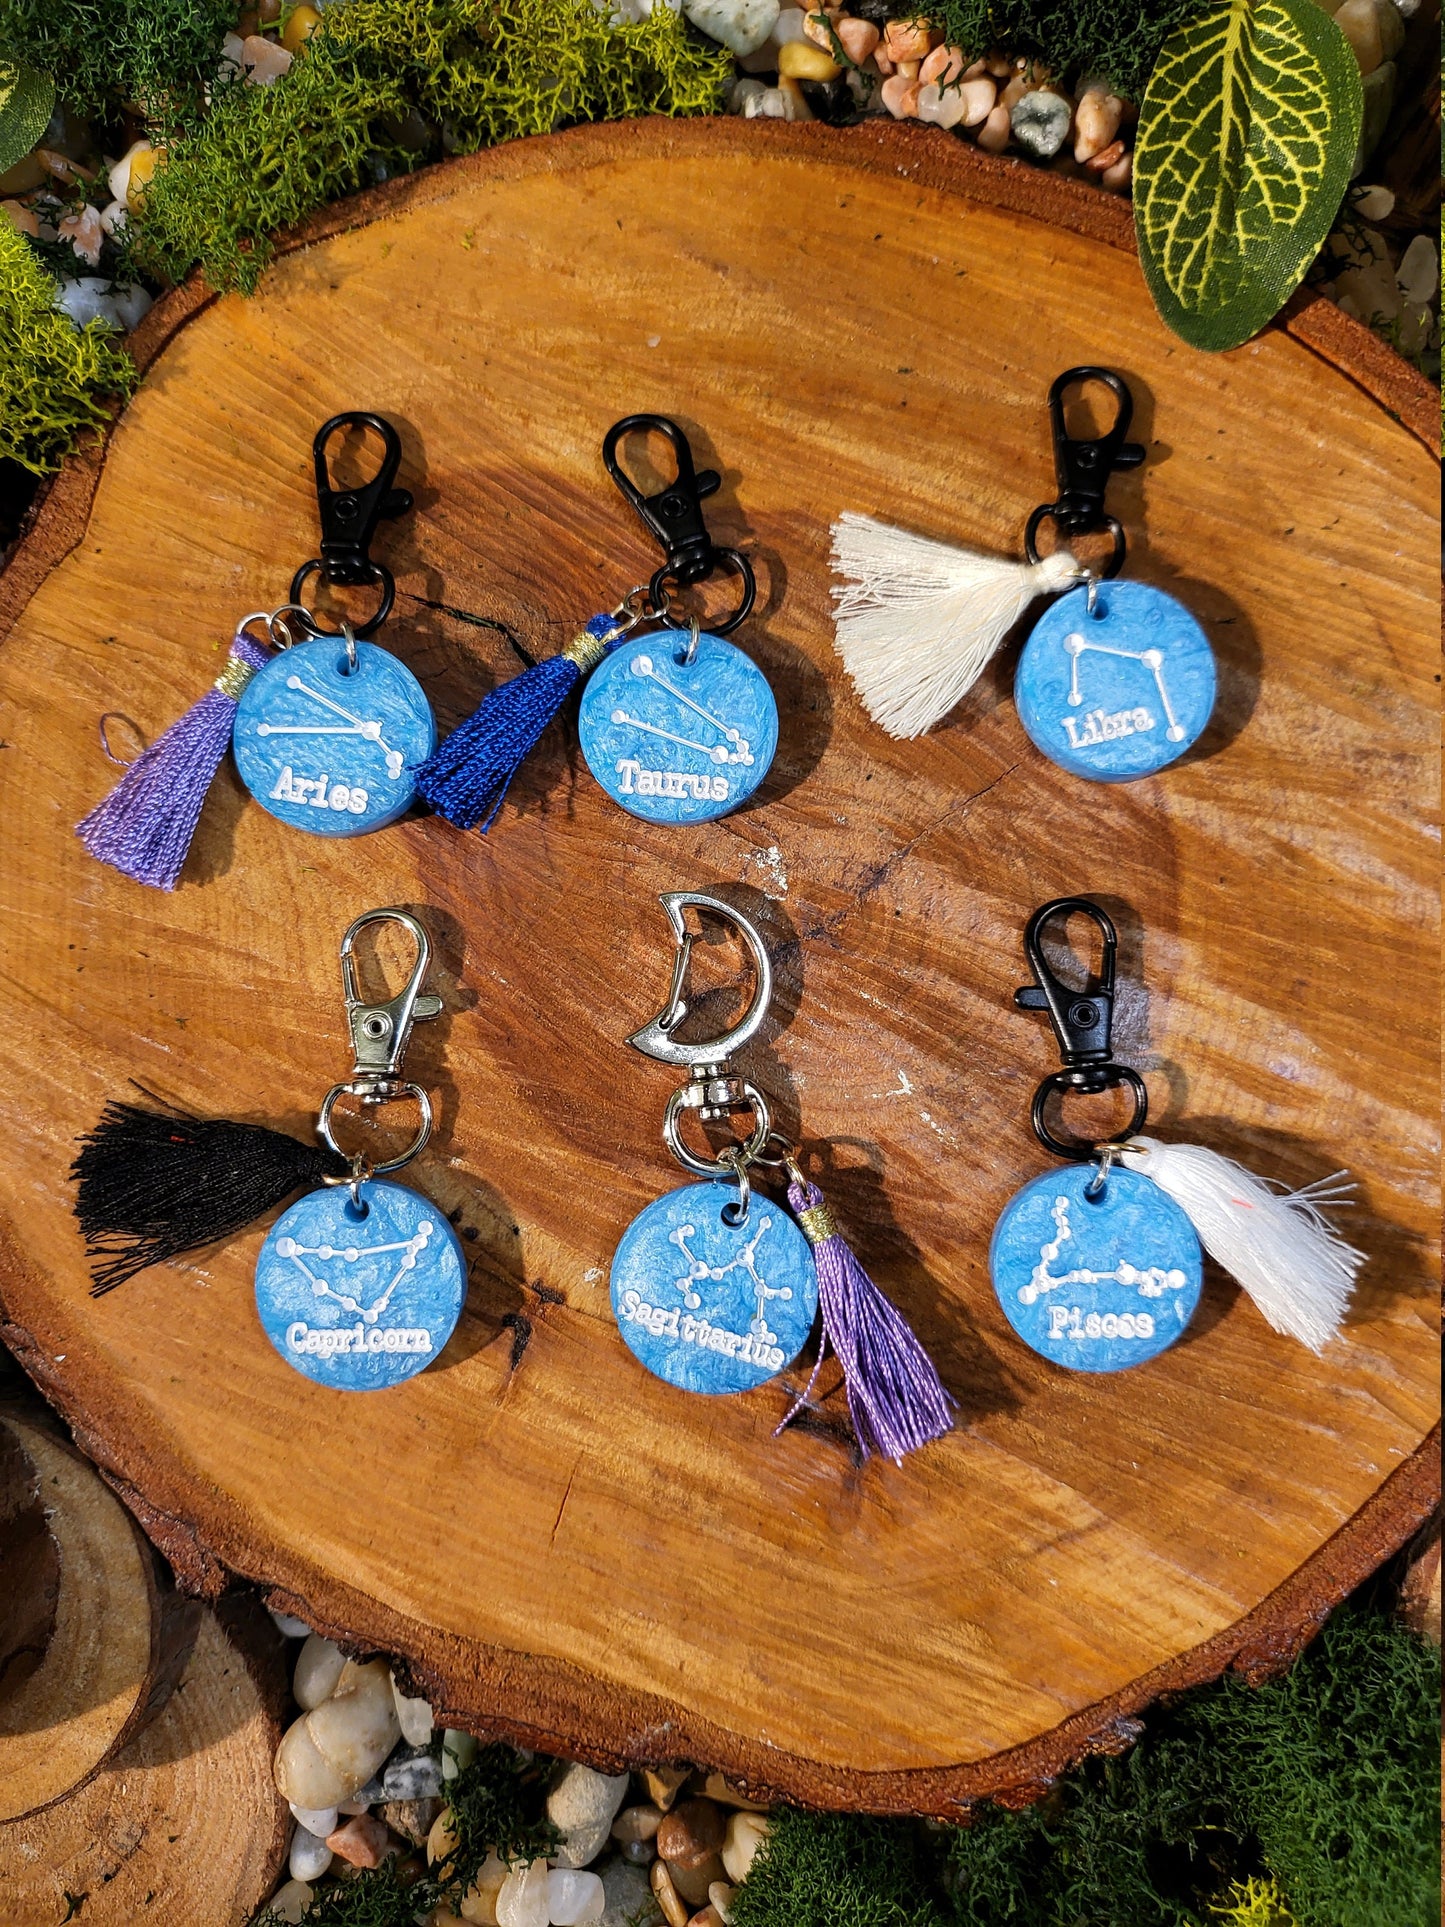 Light Blue and White Astrological Keychains with Charms